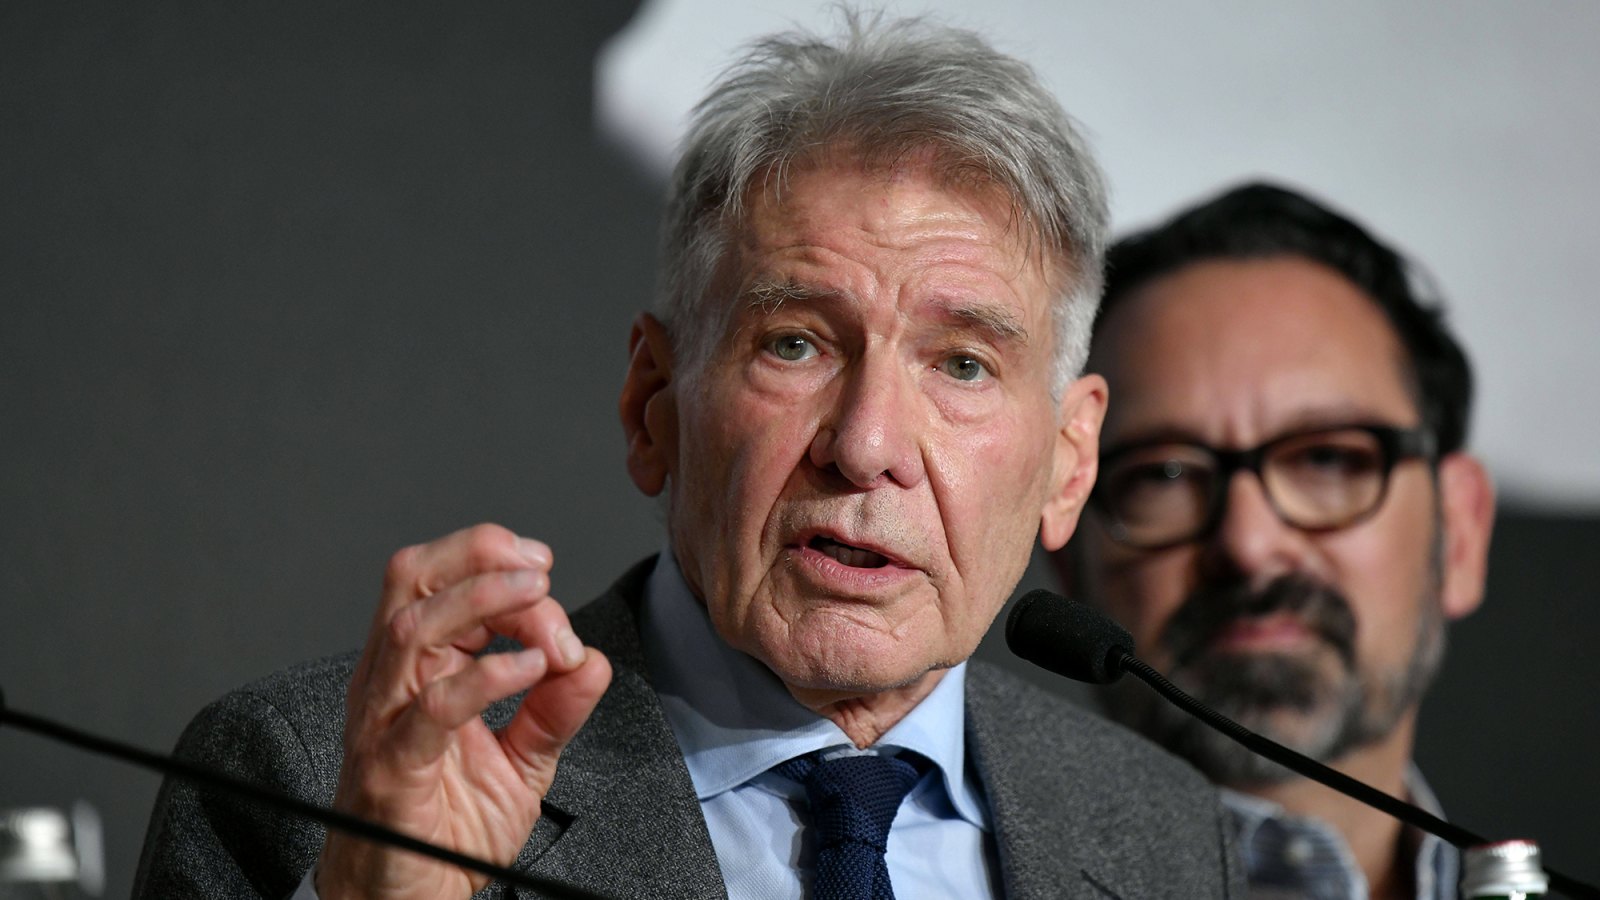 Han Solo or Indiana Jones, who would win in a fight?  Harrison Ford: 'Why are you asking me this bullshit?'